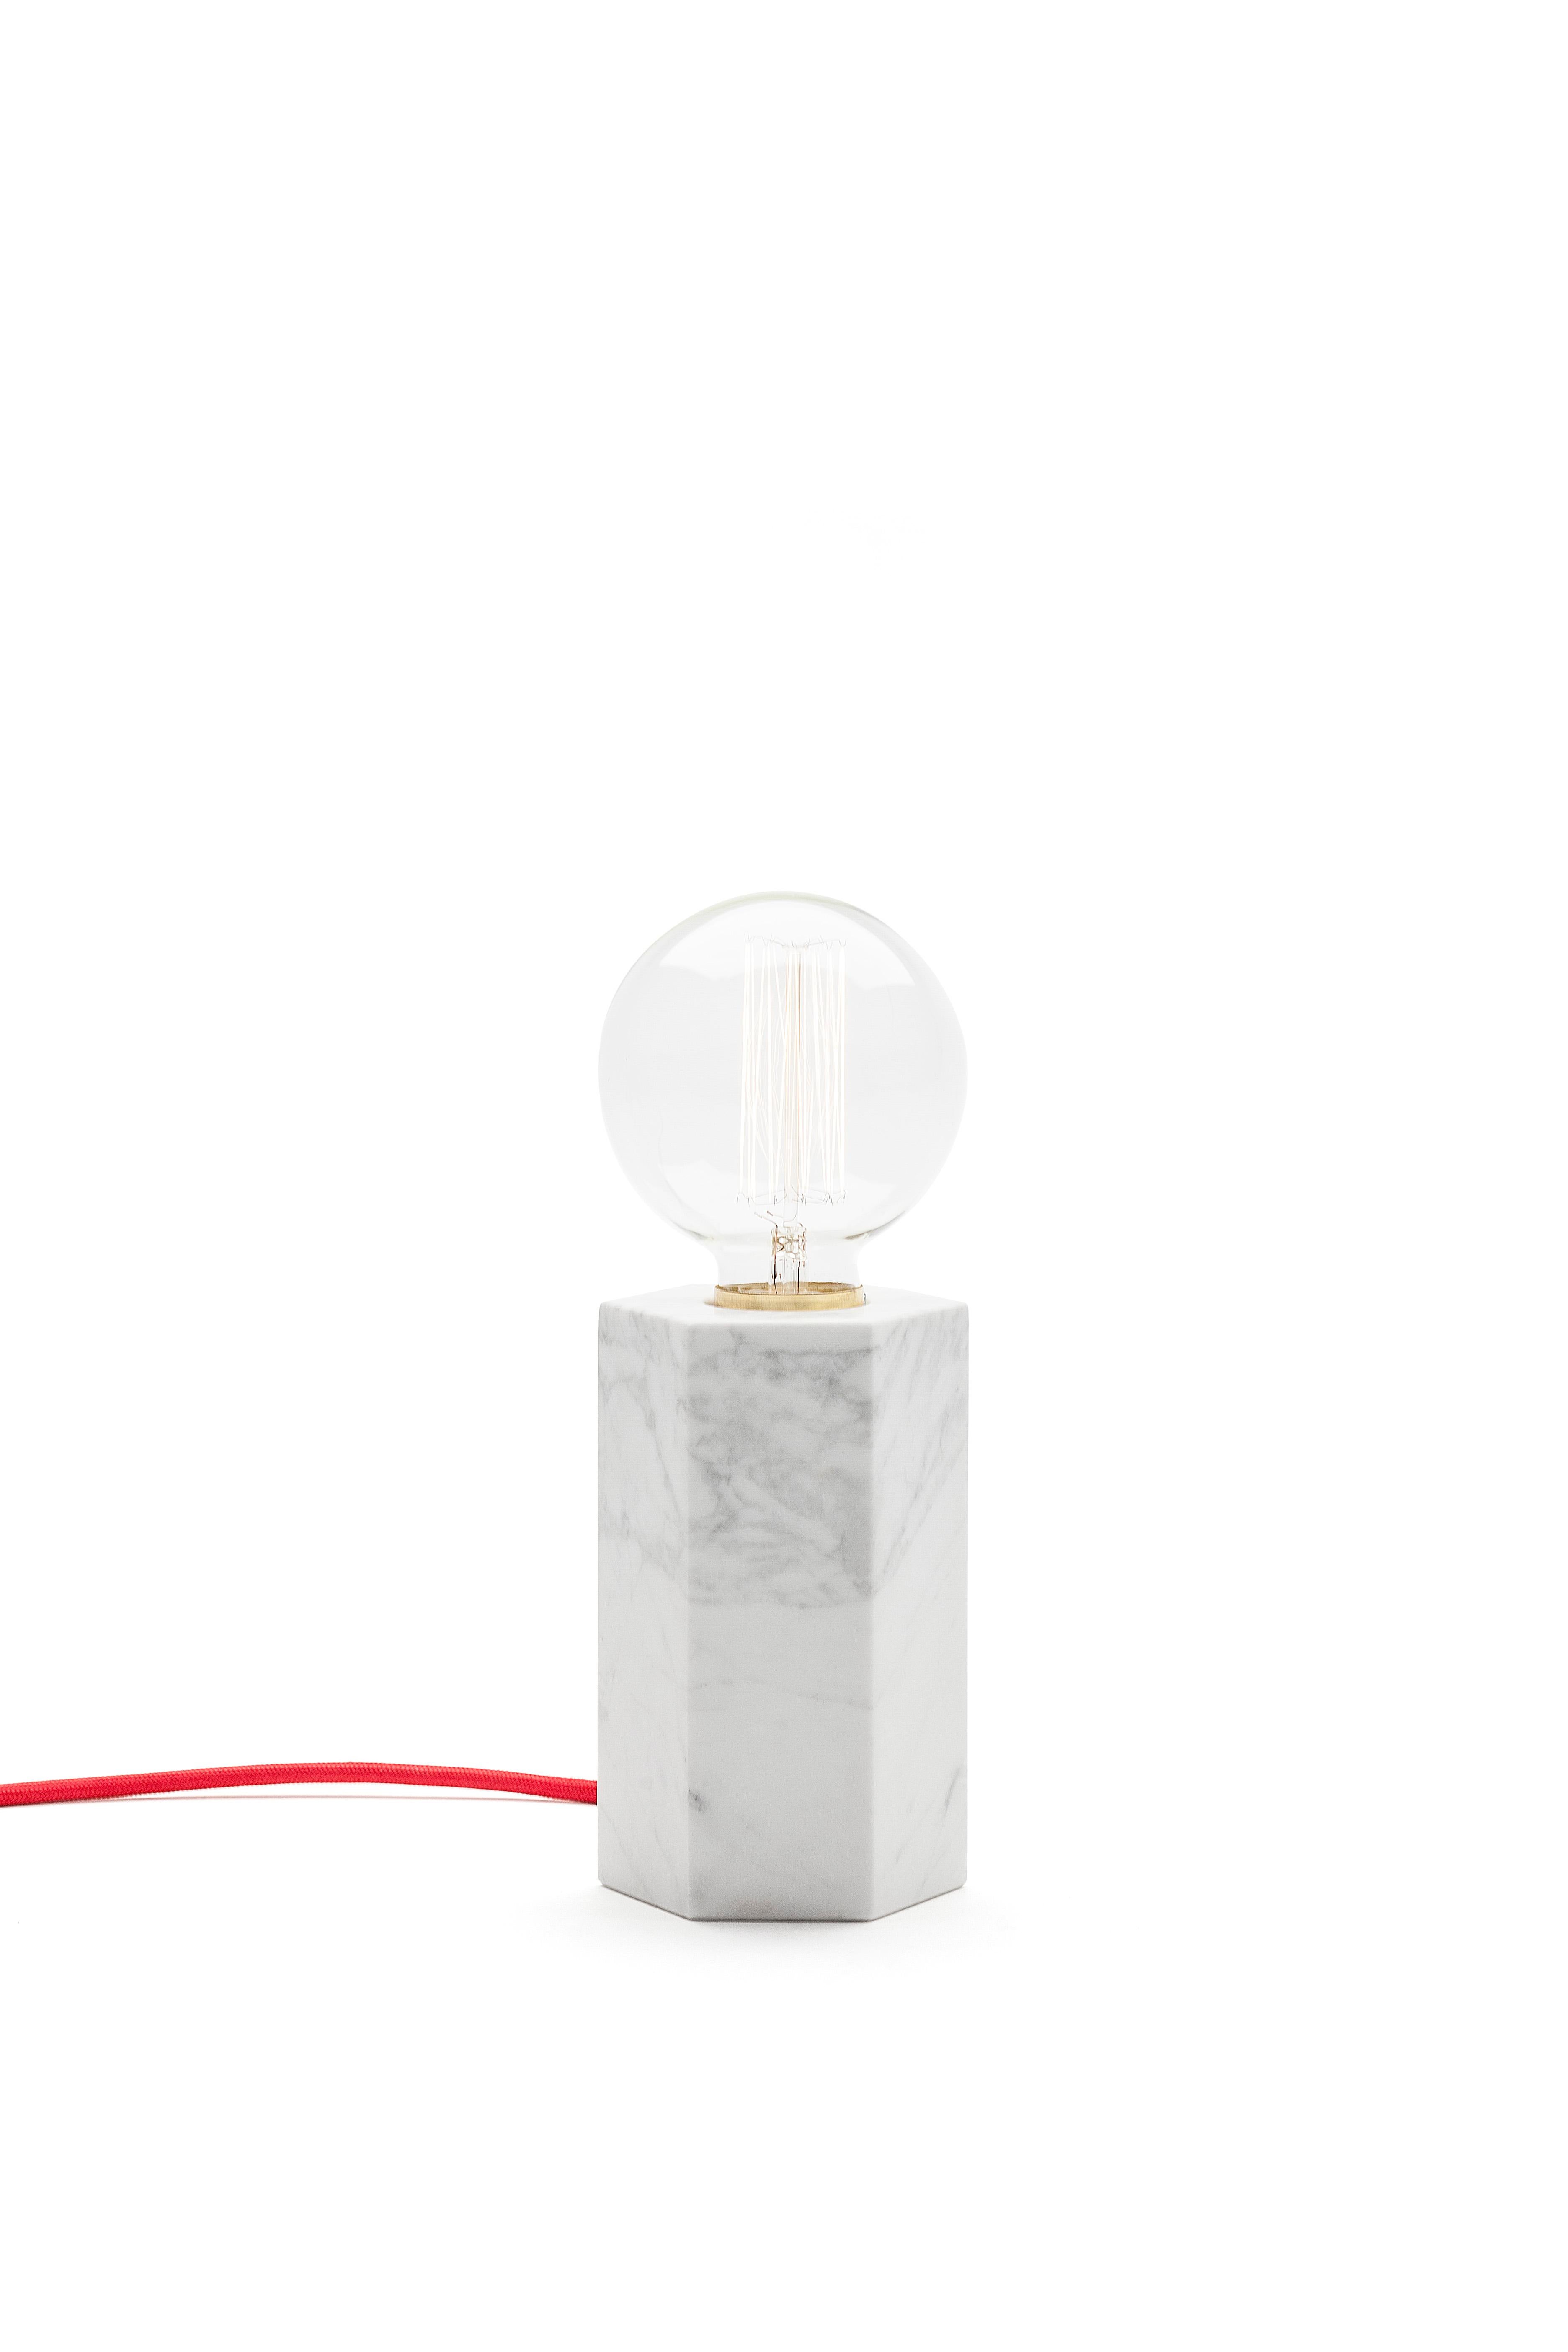 Black hex lamp by Joseph Vila Capdevila
Material: Carrara marble, red cord
Dimensions: 8.5 x 15 x 8.5 cm
9.5 x 24.5 x 9.5 cm
Cord 1.5 m
Weight: 2.2 kg  


Aparentment is a space for creation and innovation, experimenting with materials with the goal